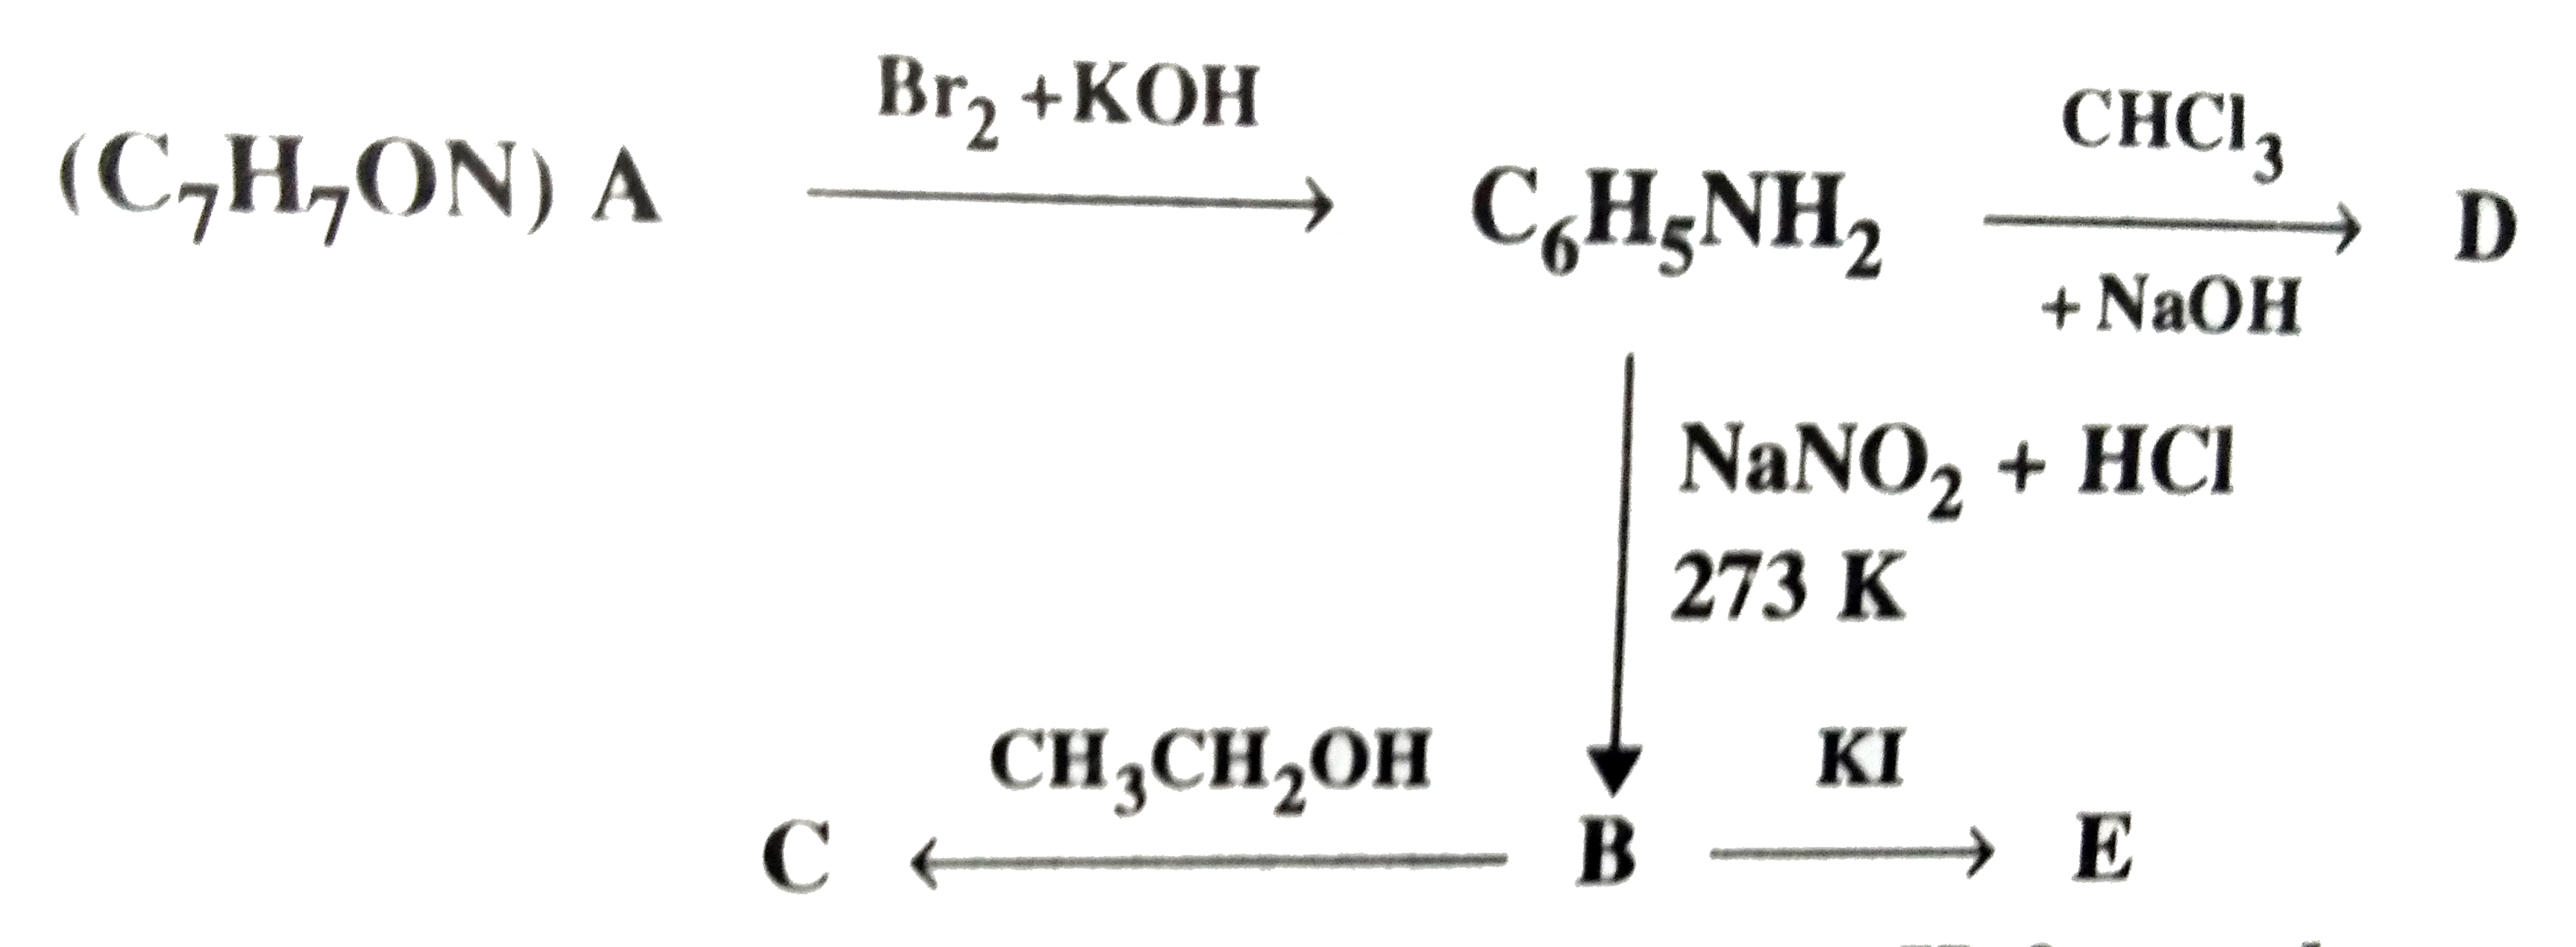 An aromatic compound 'A' of molecular formula C(7)H(7)ON undergoes a series of reactions as shown below. Write the structure of A,B,C,D and E in the following reactions: